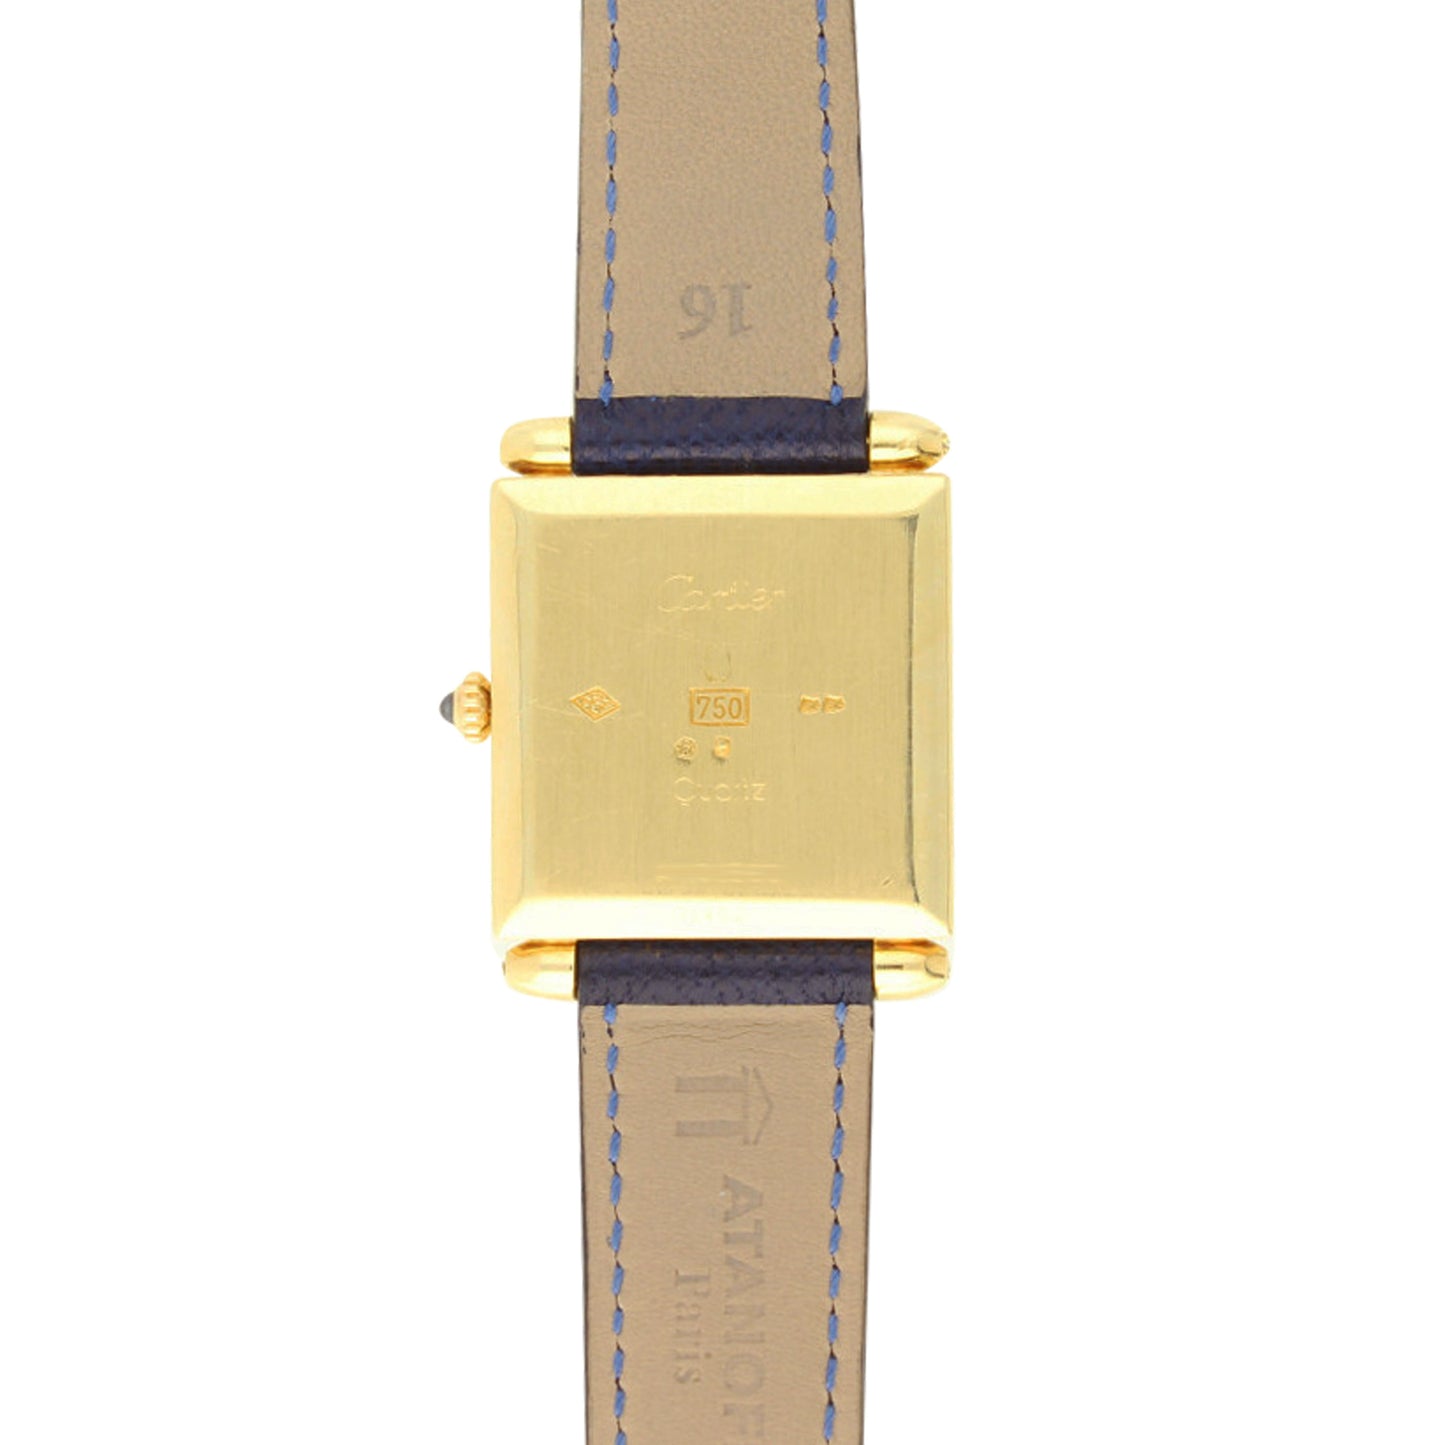 18ct yellow gold Cartier'Quadrant' wristwatch. Made 1970's